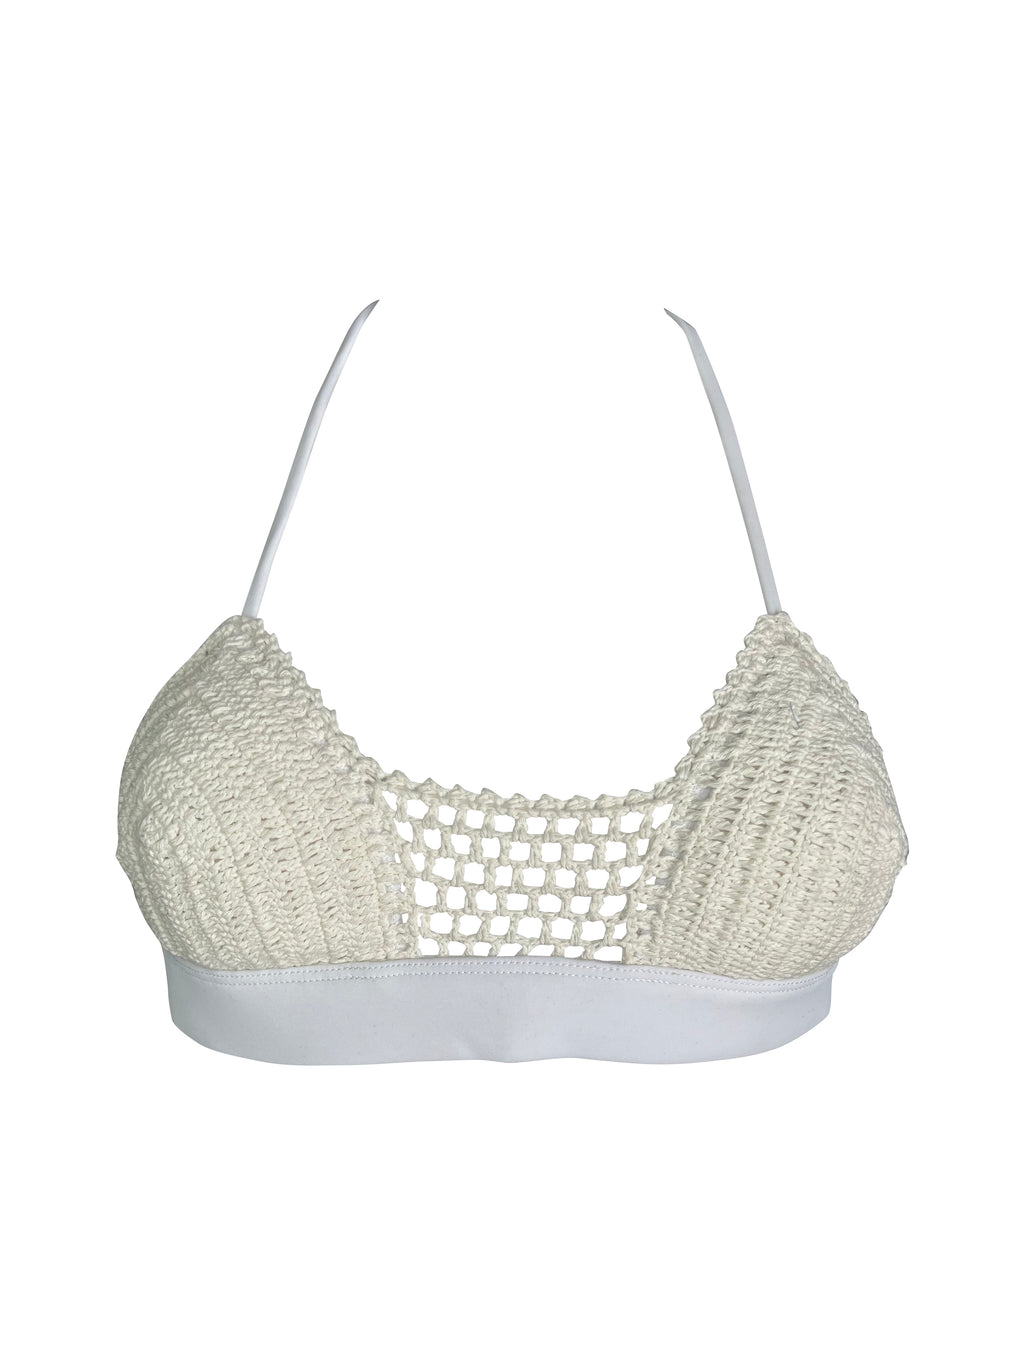 Crochet Lace Bralette in White FINAL SALE, Madi Savvy Boutique